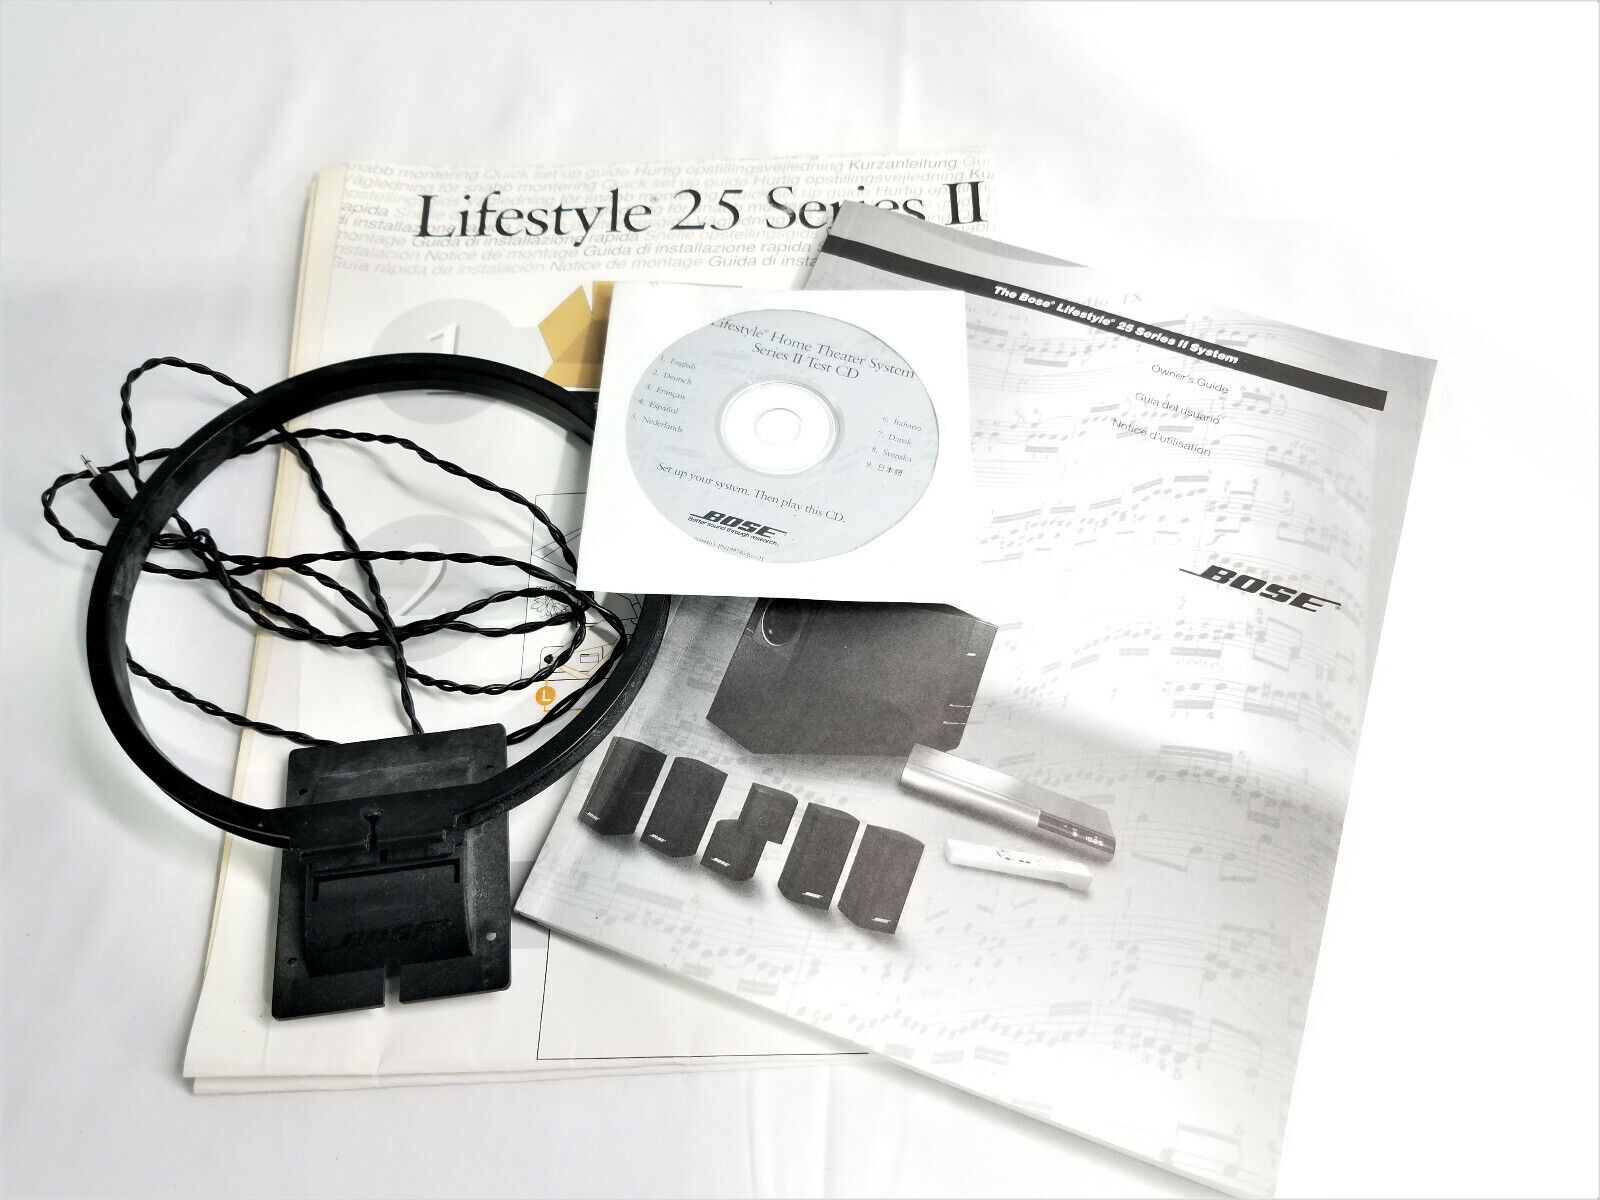 Intens Ægte om BOSE Lifestyle 25 Series II Owners Manual + Quick setup Guide + AM Antenna  + CD | eBay